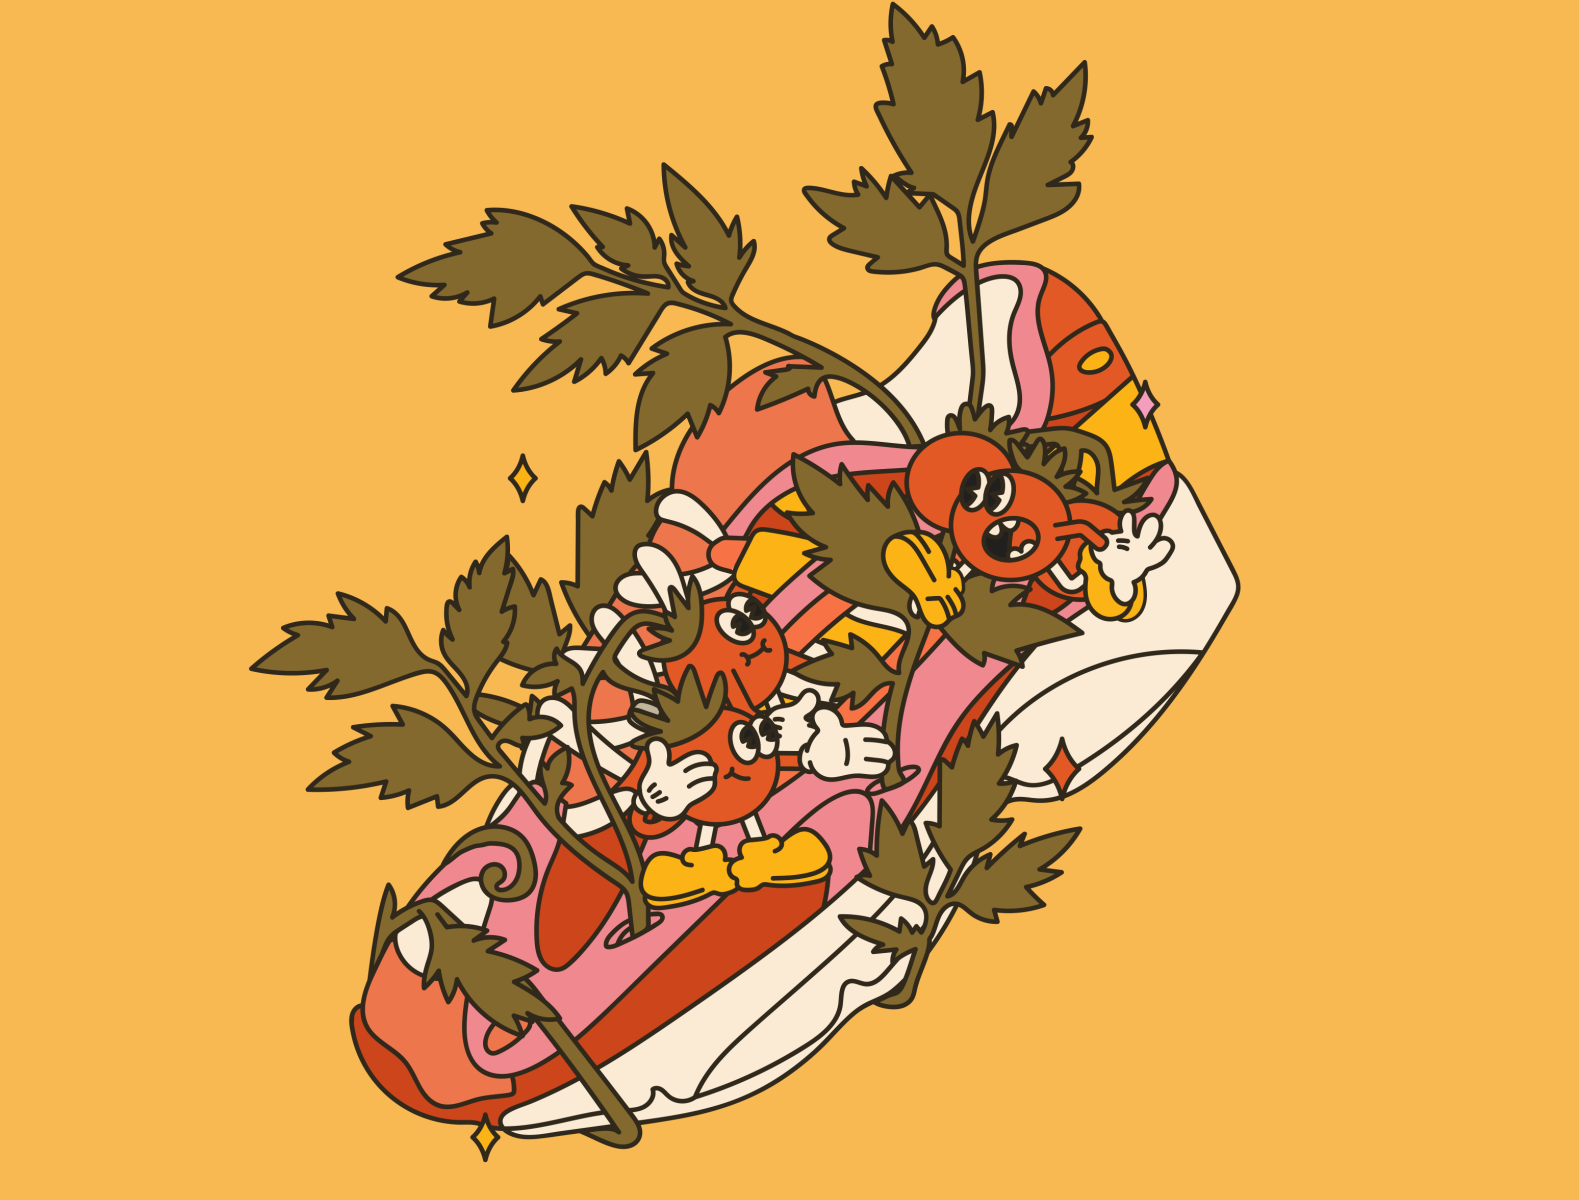 adidas vs nature by valestrator on Dribbble